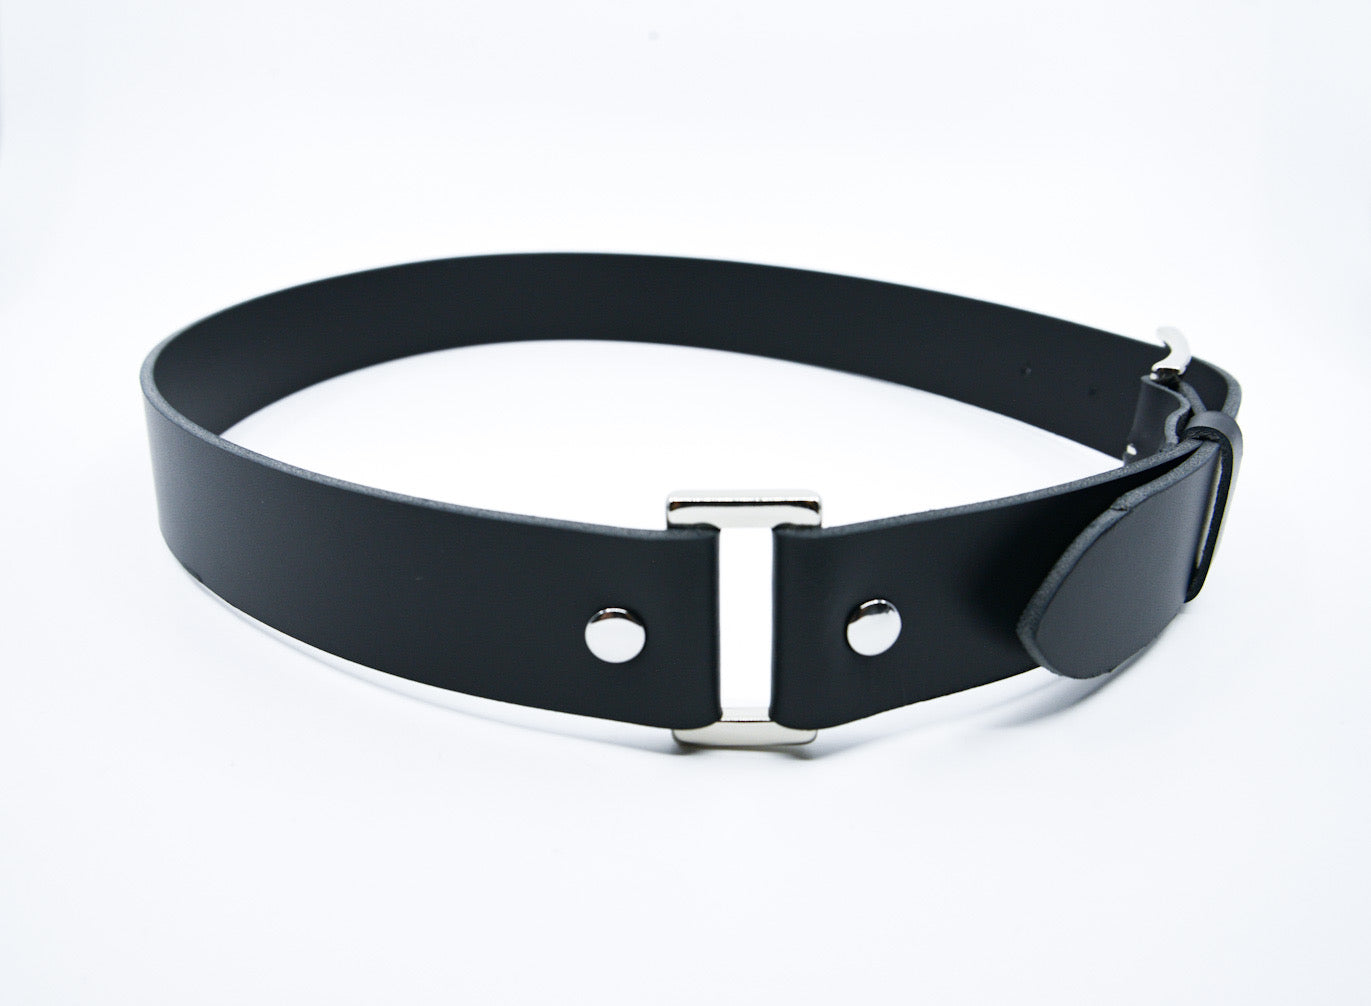 Square Ring Buckle Belt